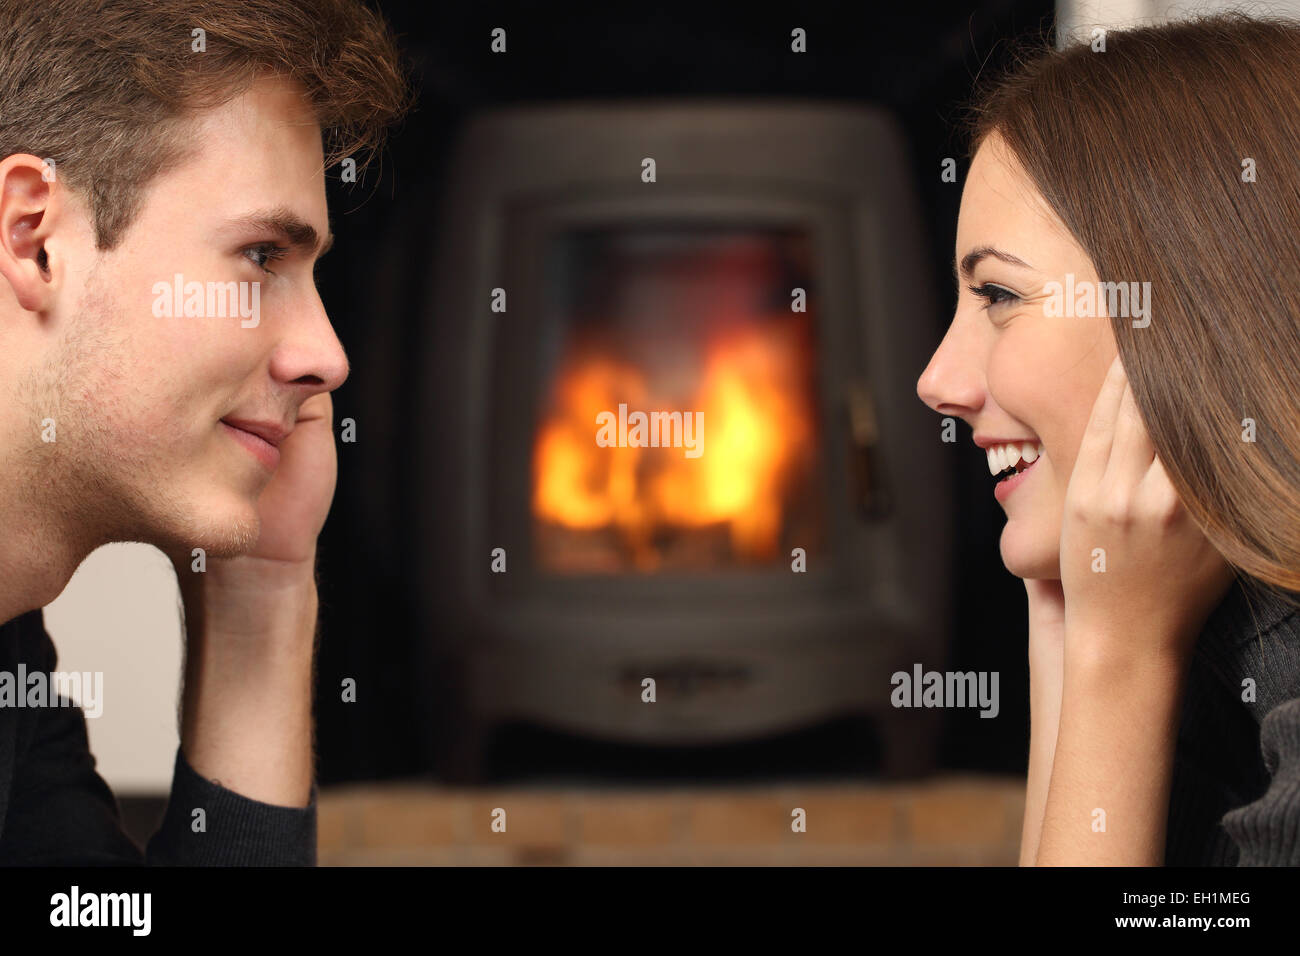 Side view of a couple flirting and looking each other in front a fireplace Stock Photo